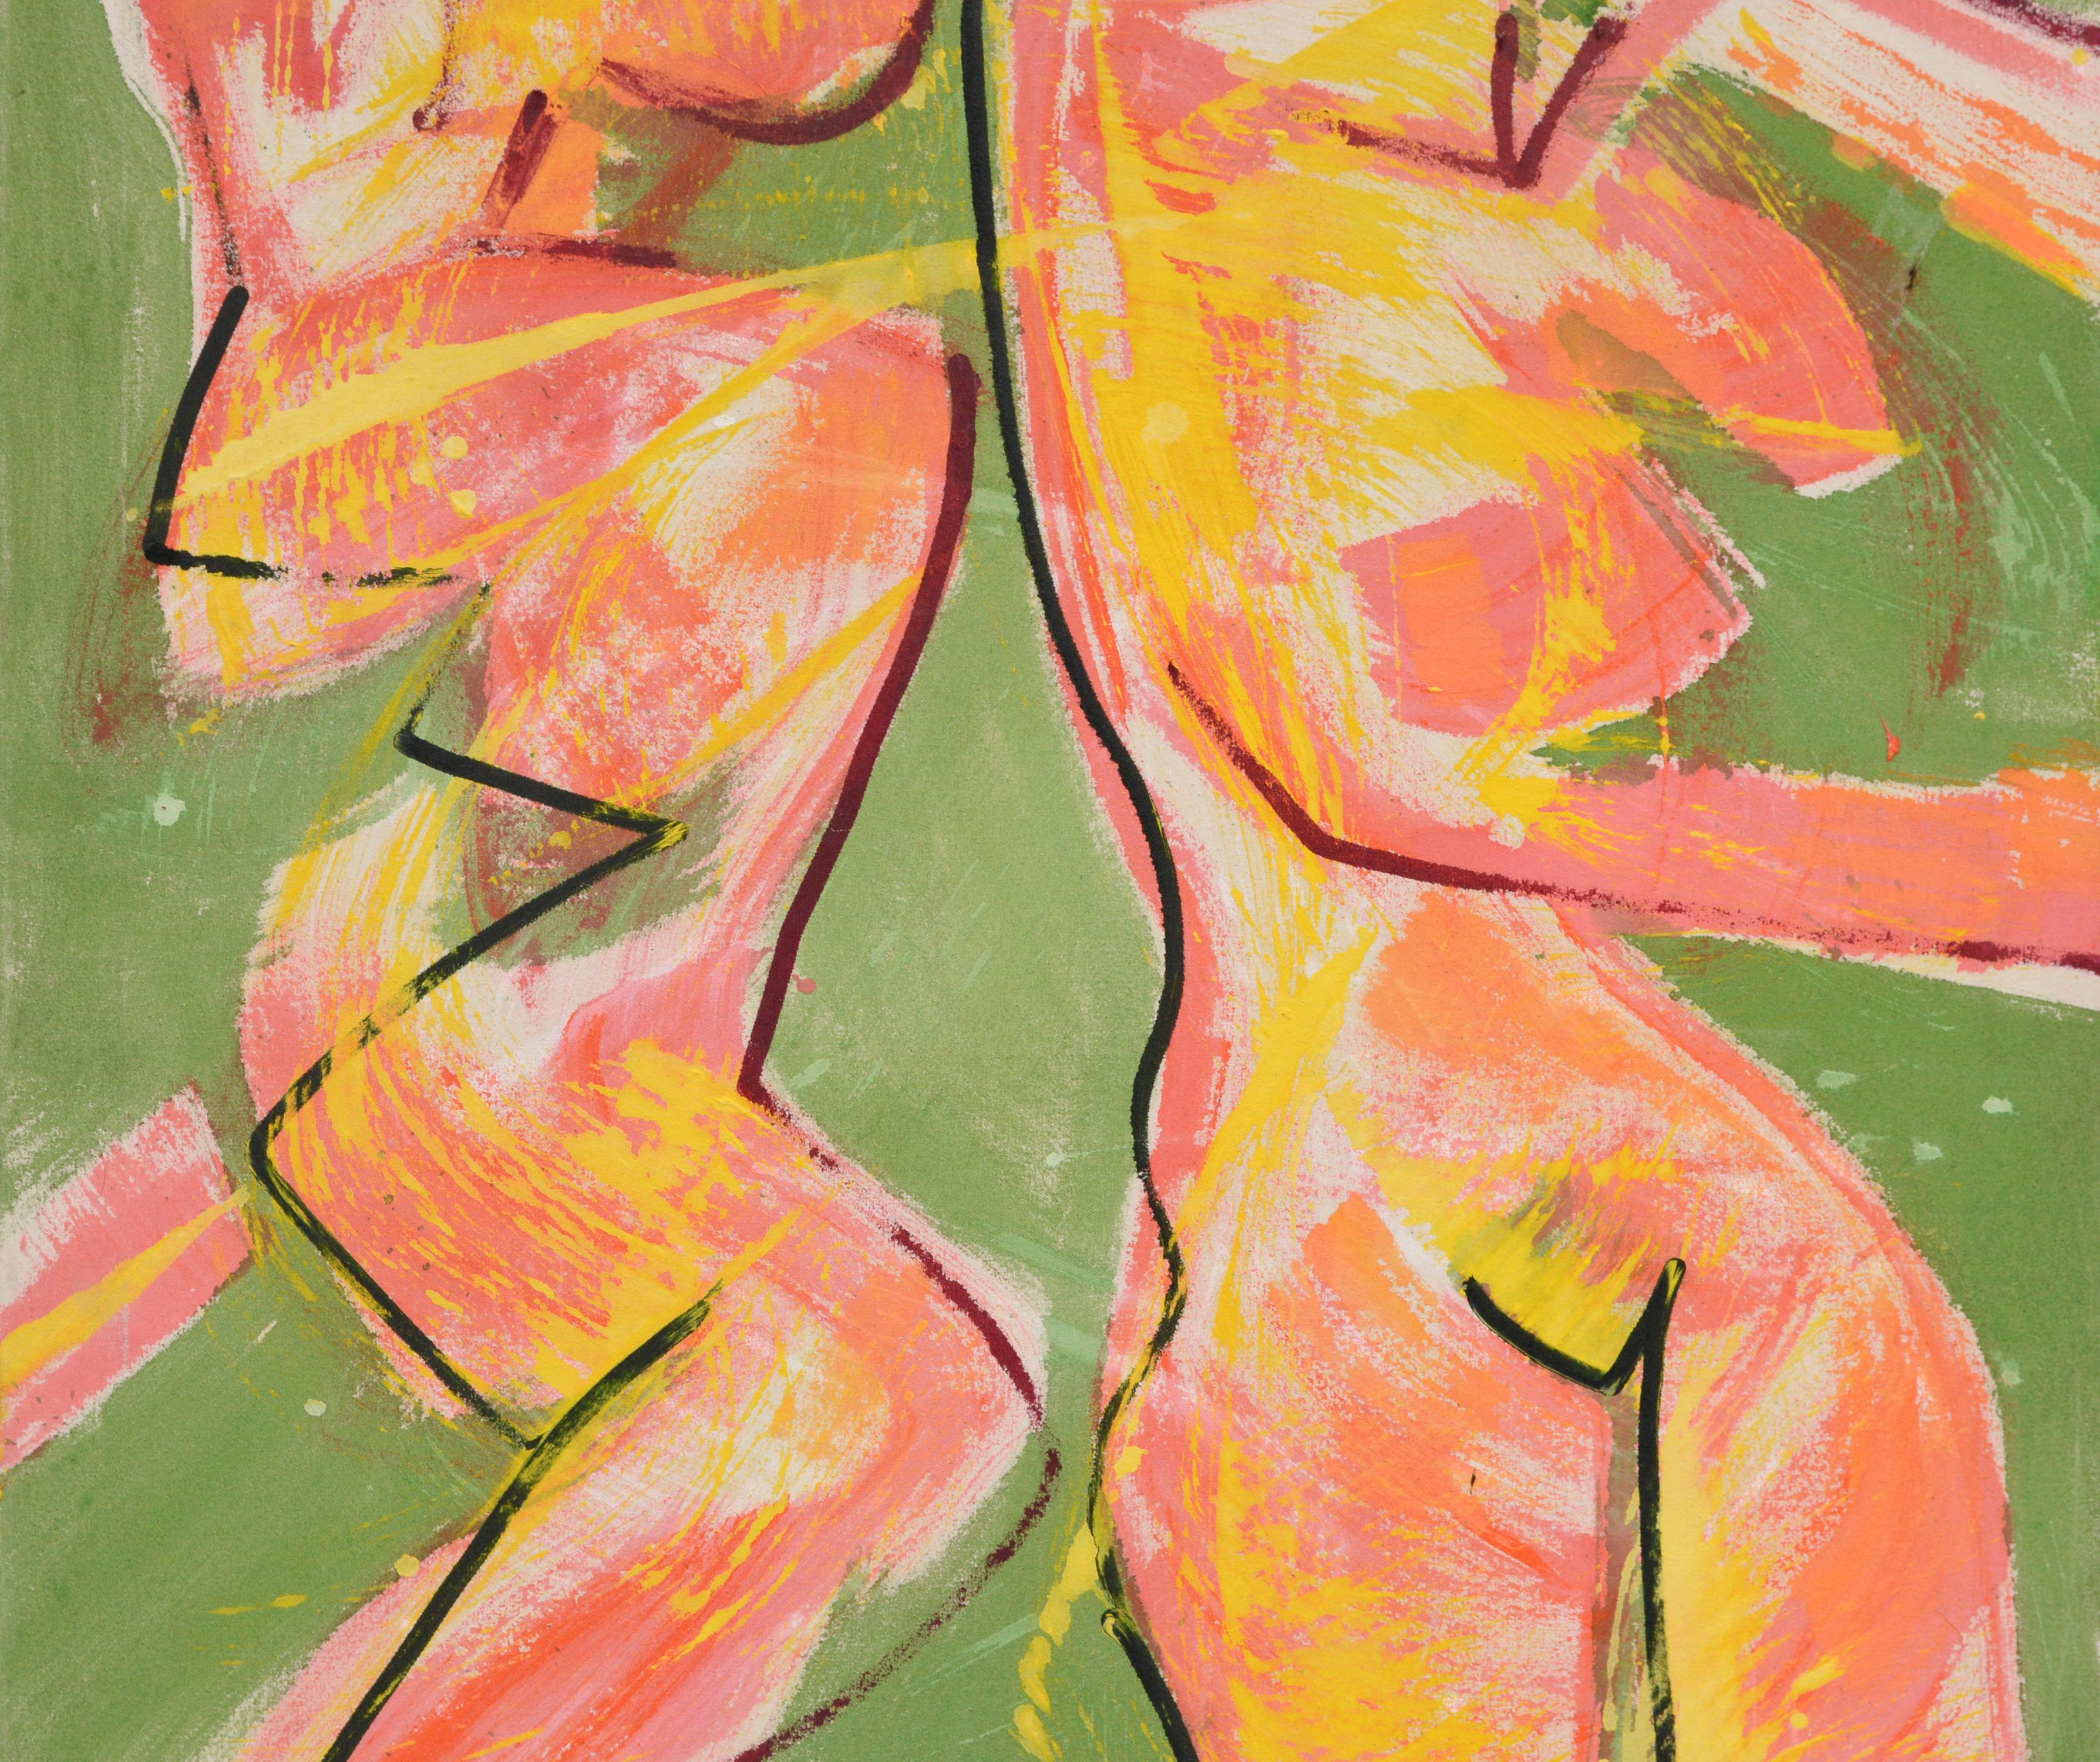 Two Dancing Figures - Abstract Figurative - Brown Figurative Painting by Burchart